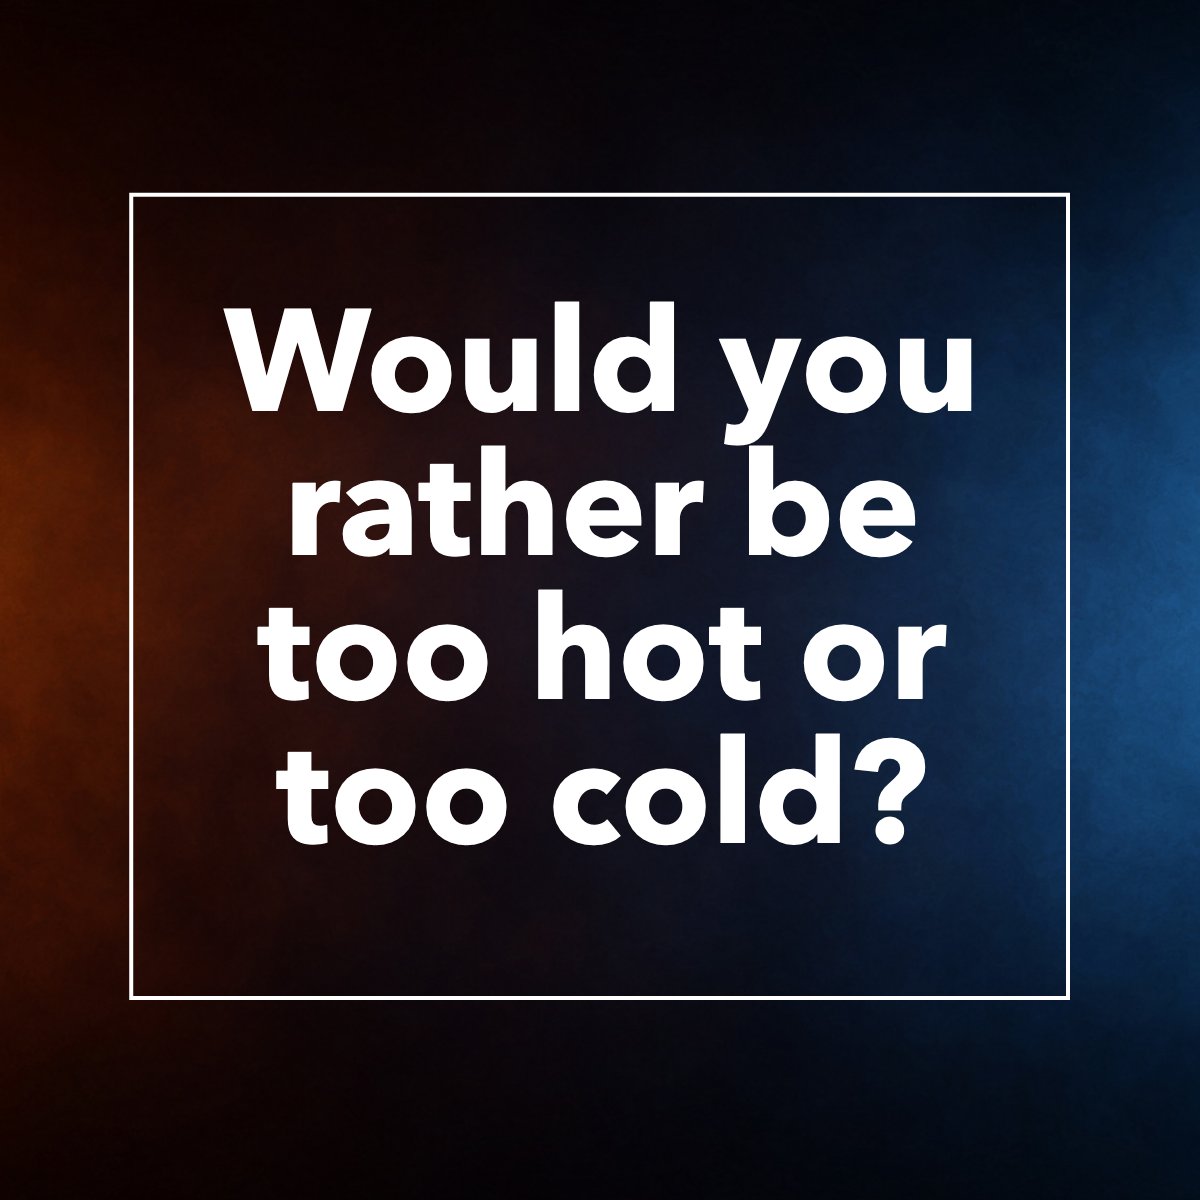 Would you rather be too hot or too cold? 🌡

Tell us below!
 
#orange     #blue     #hot     #cold     #question     #blueandorange     #orangeandblue